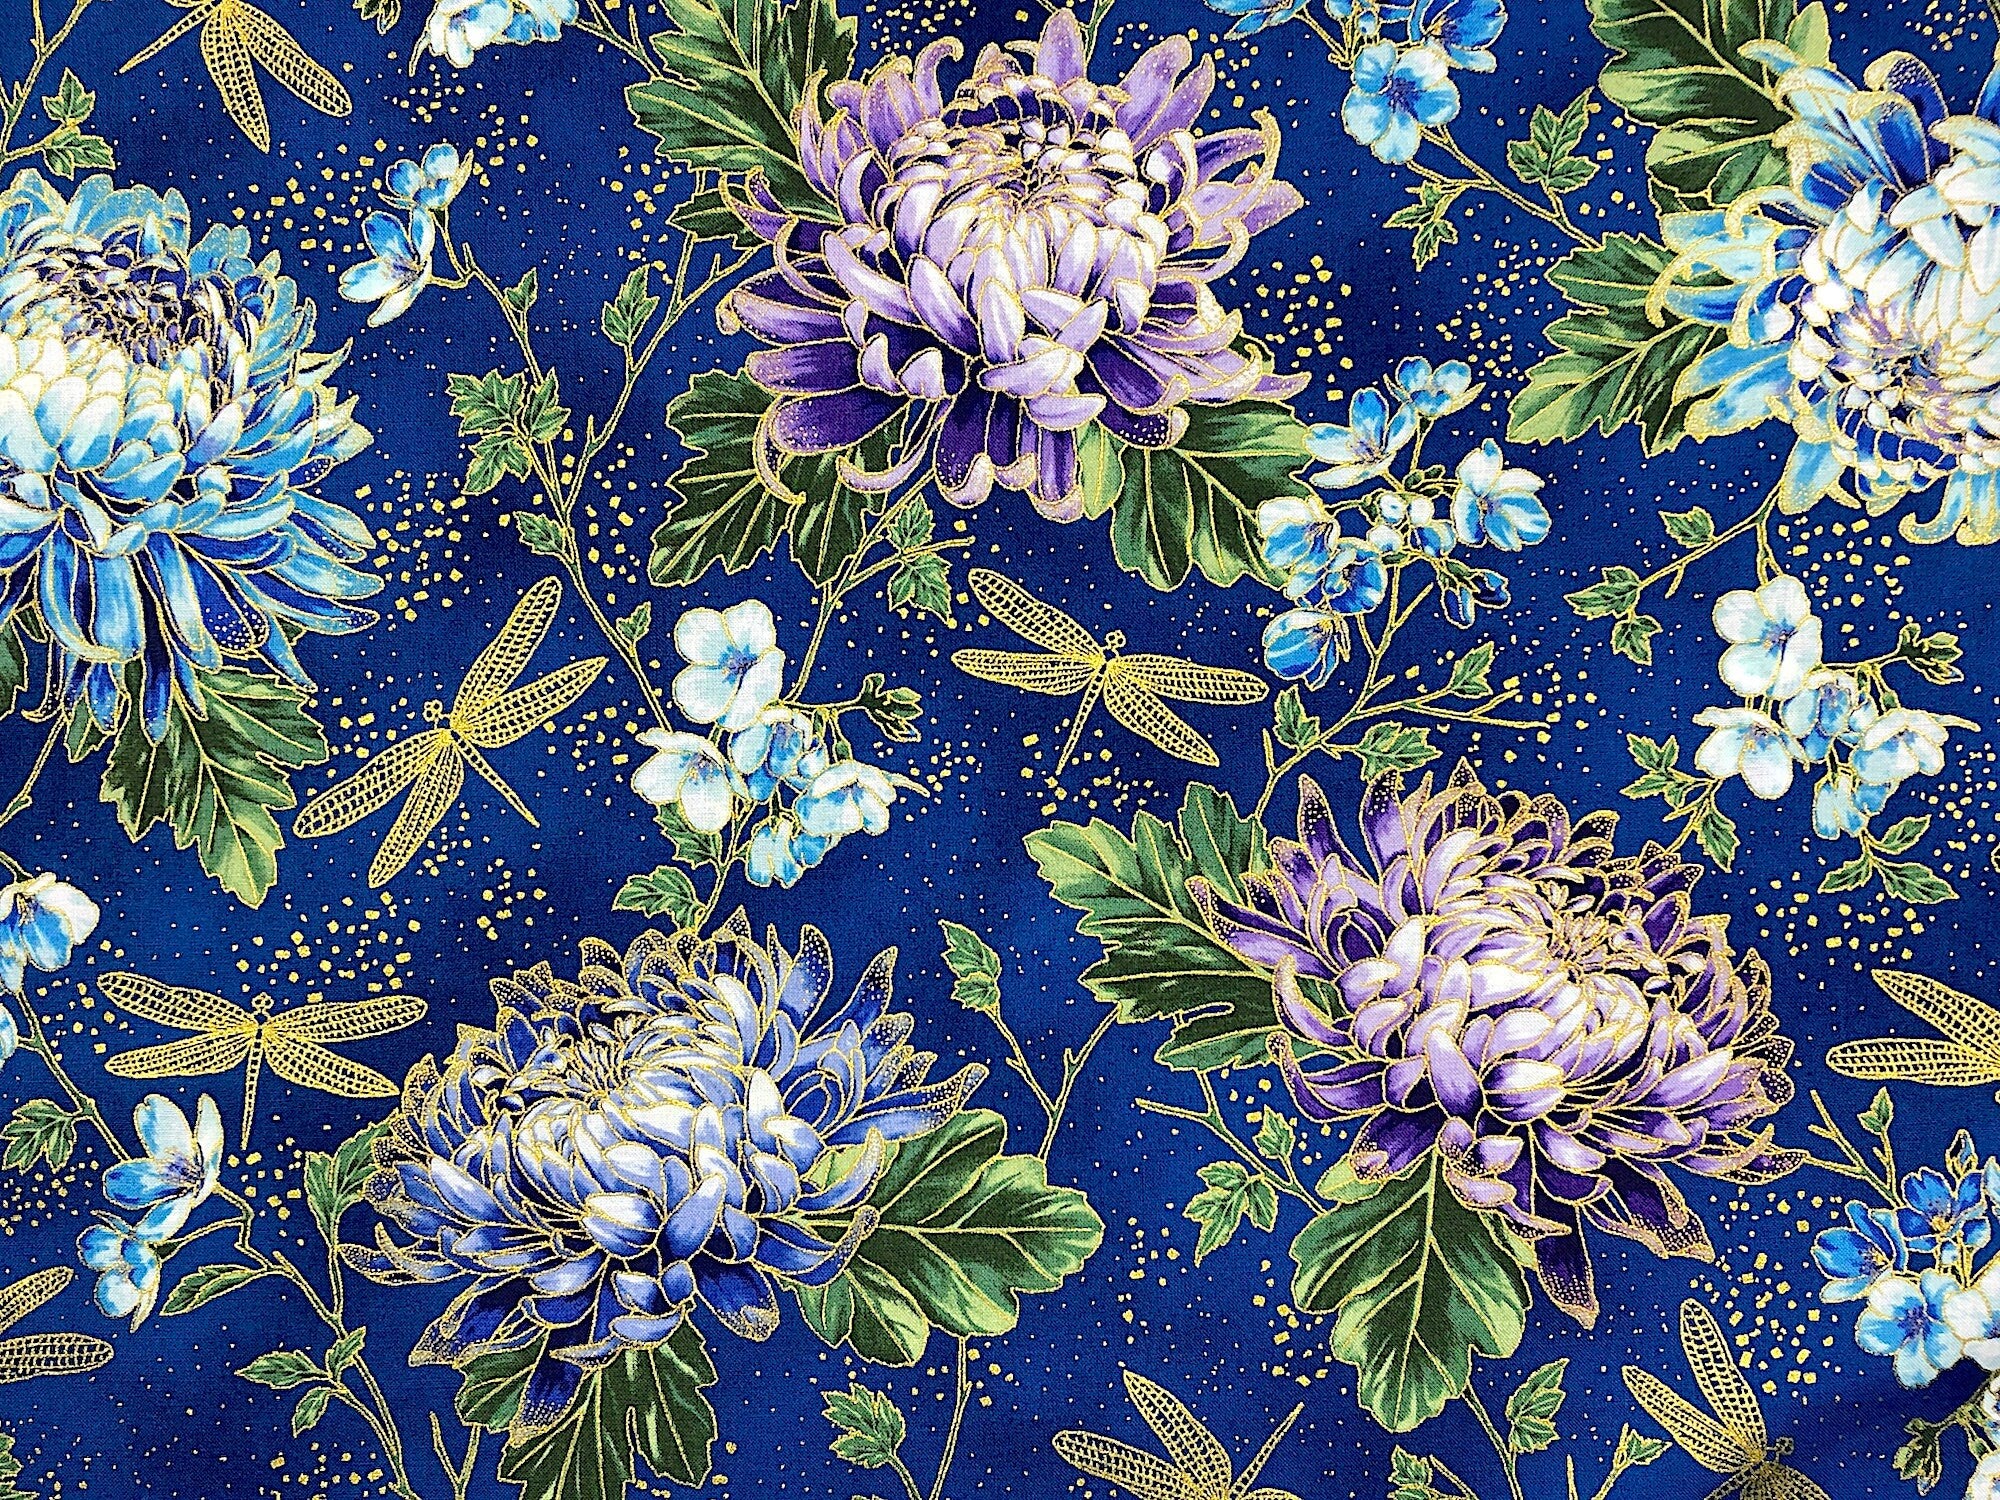 Blue cotton fabric covered with blue and purple hydrangeas and gold dragonflies.